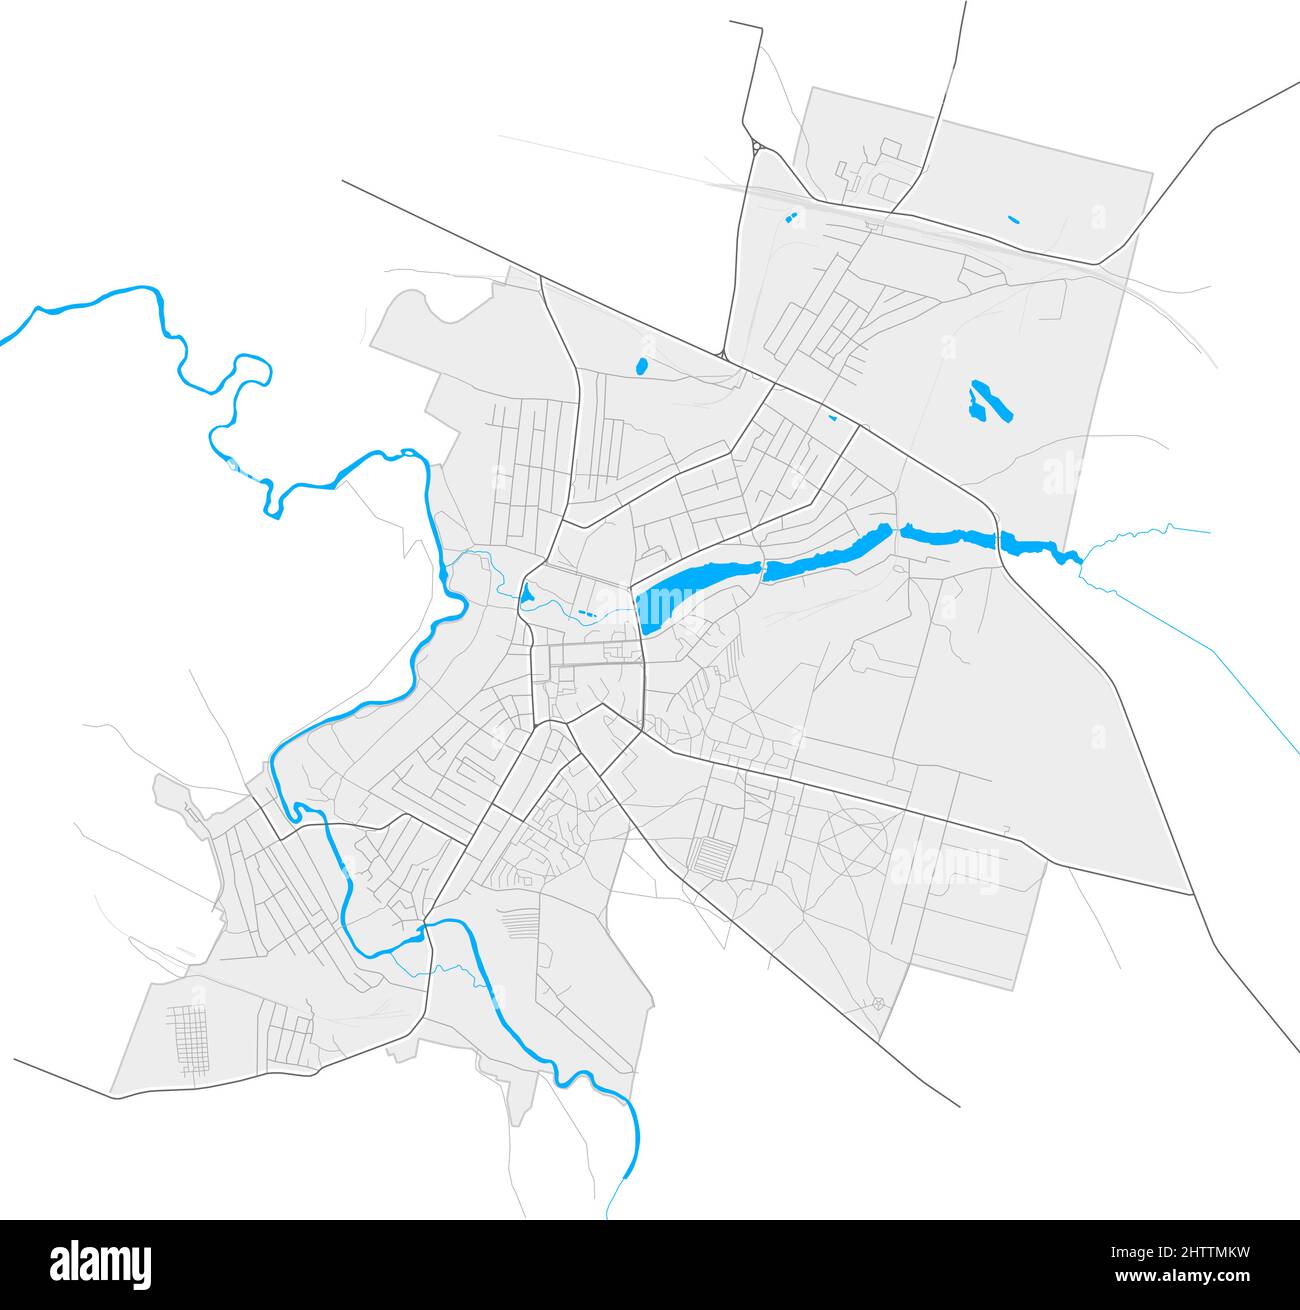 Slavuta, Khmelnytskyi Oblast, Ukraine high resolution vector map with city boundaries and outlined paths. White additional outlines for main roads. Ma Stock Vector